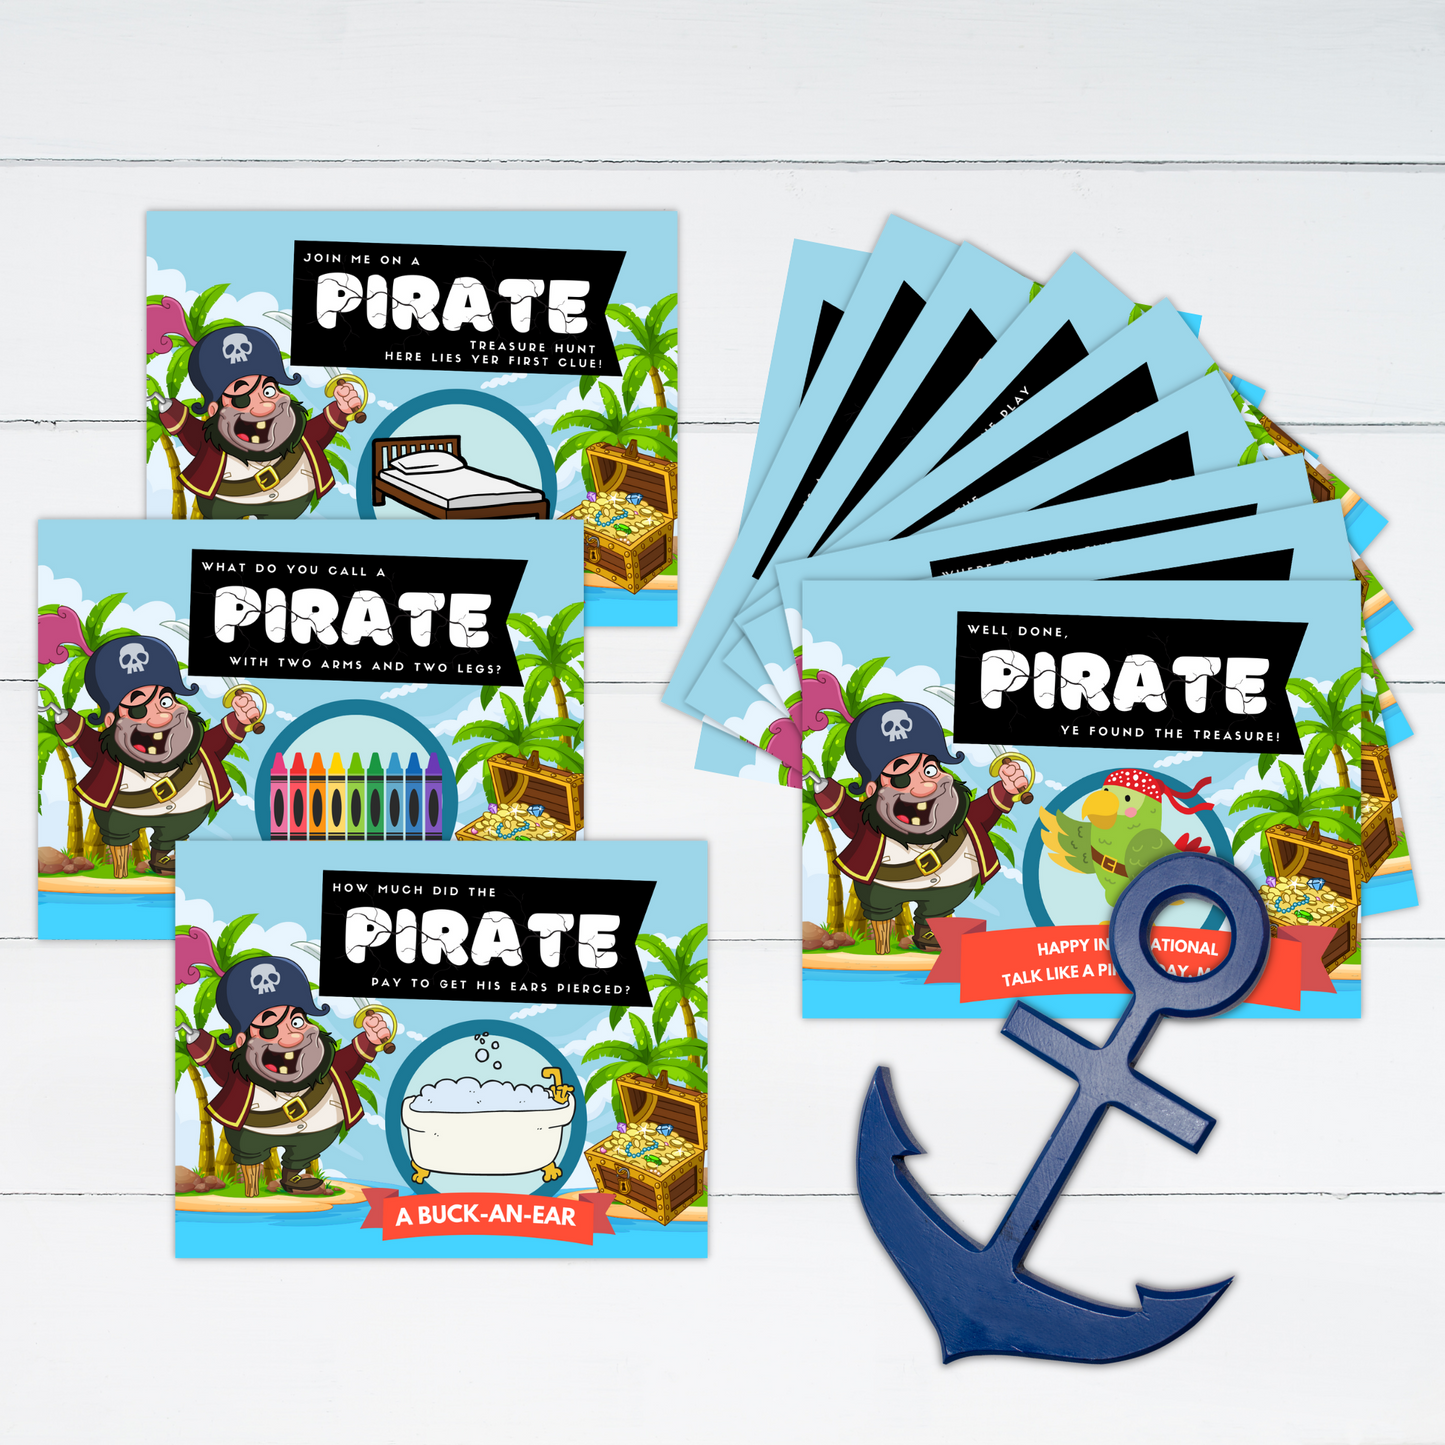 Talk Like a Pirate Day Treasure Hunt - Print at home or 1-hour photo